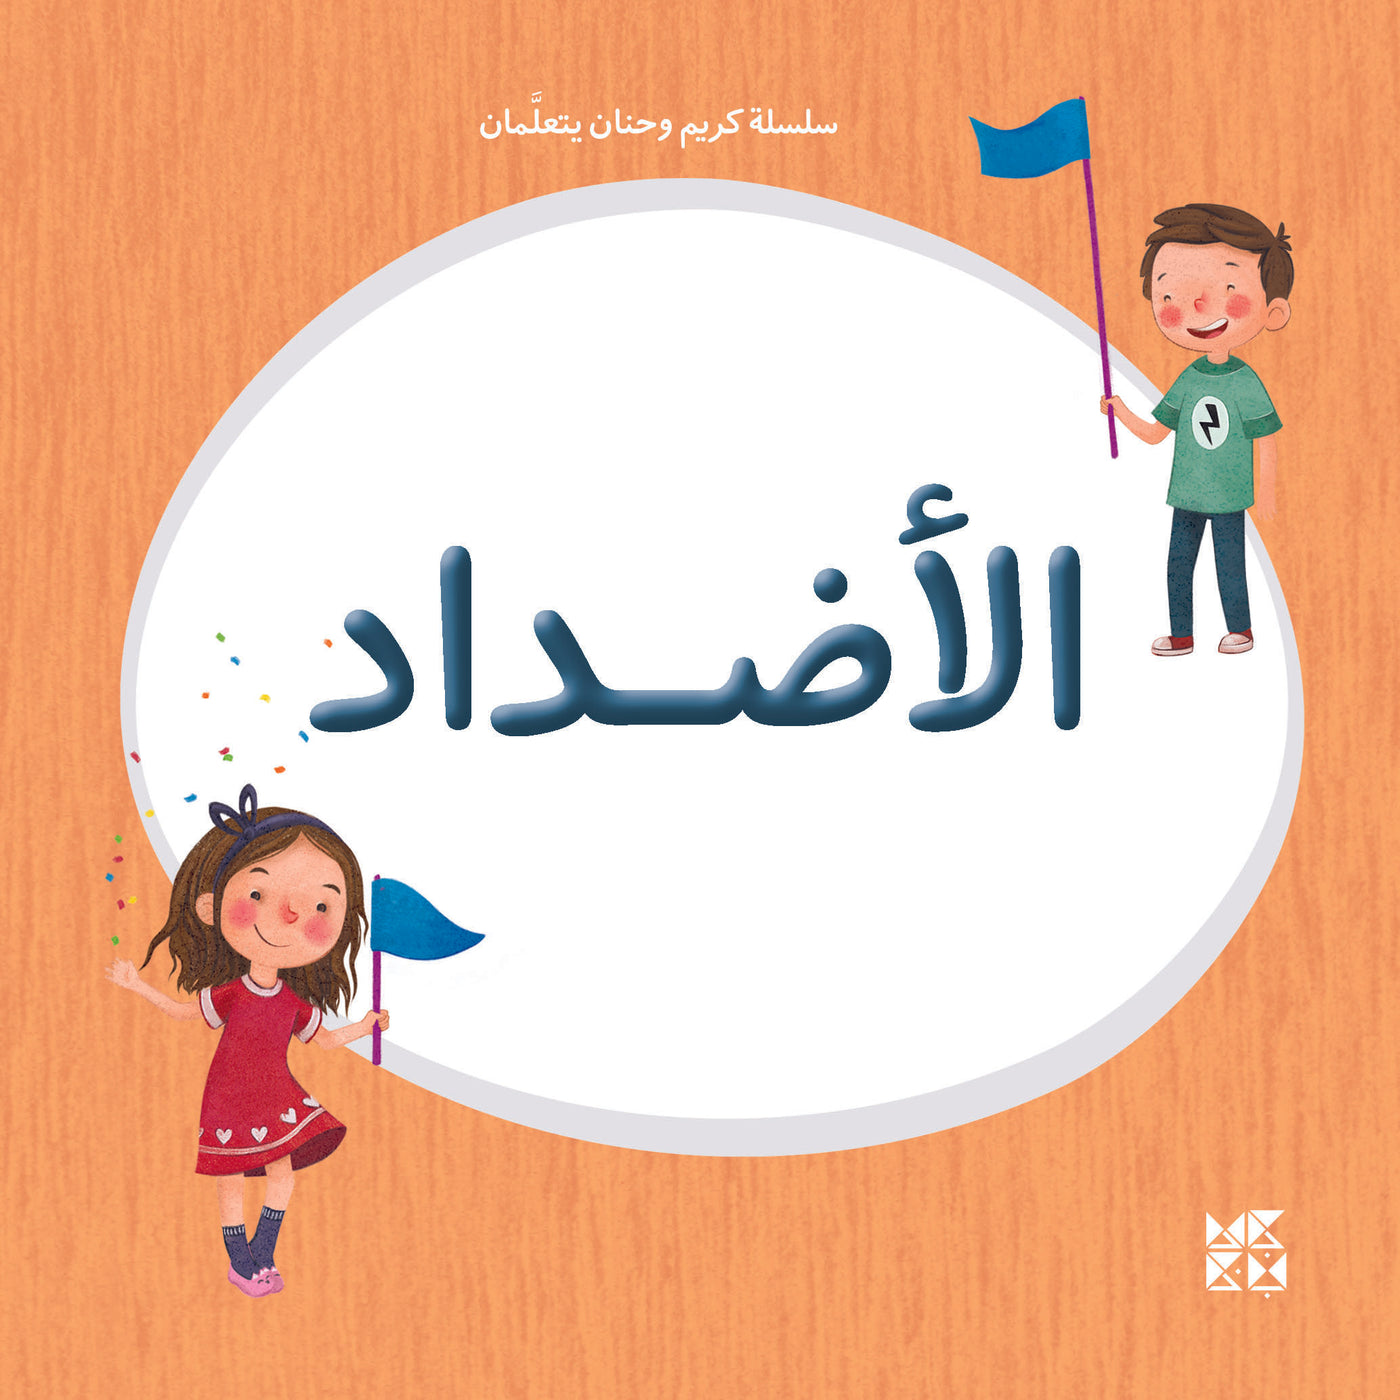 Karim and Hanan Are Learning: Opposite Book Cover